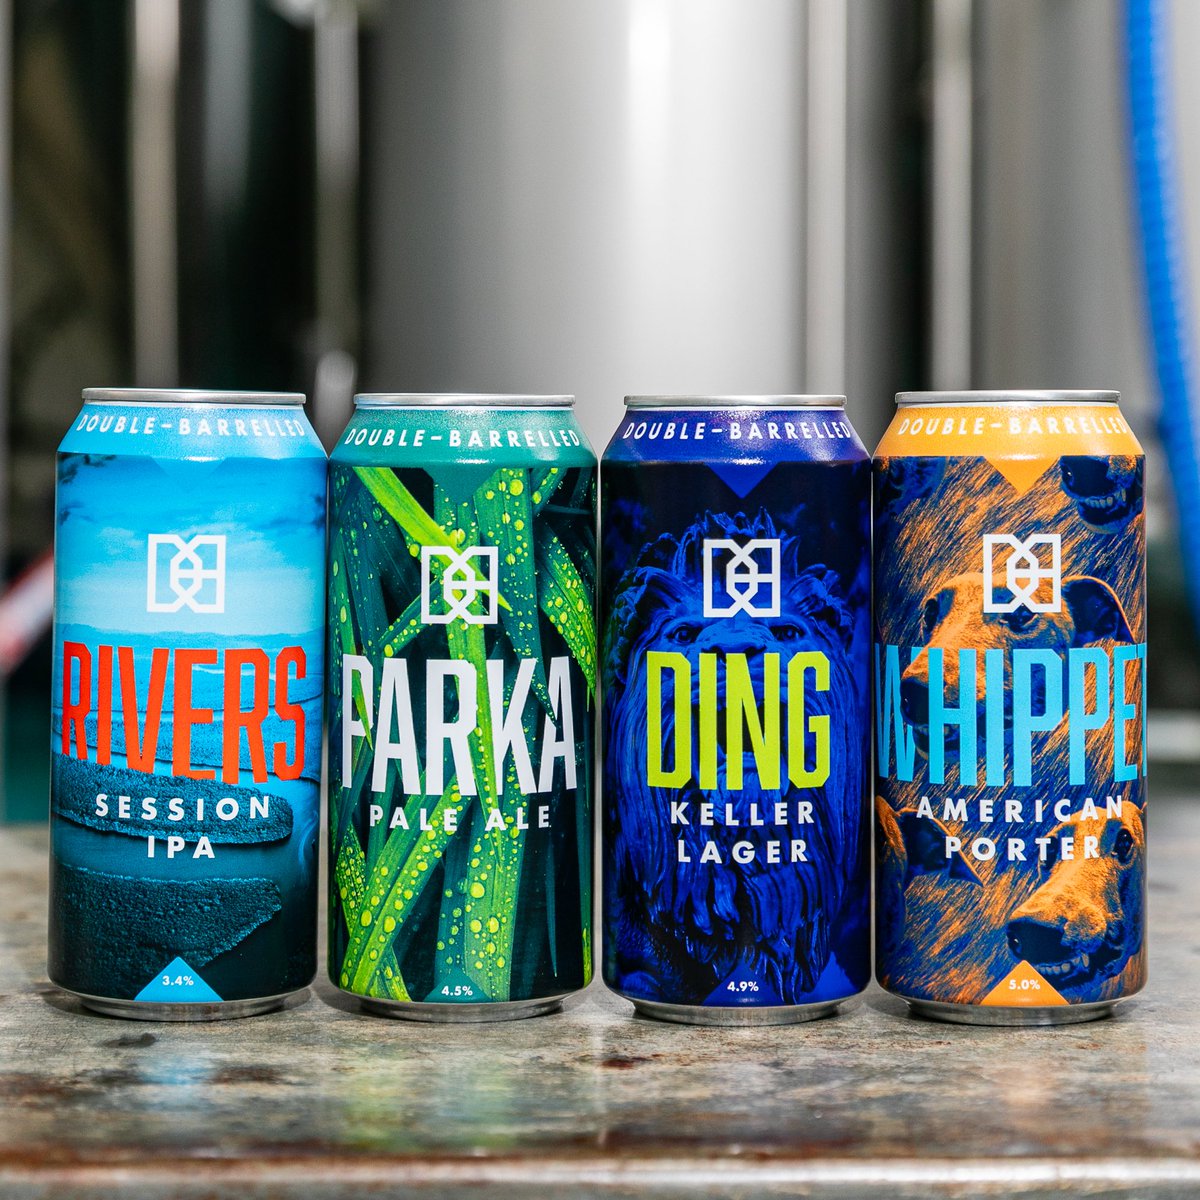 OOoohh yeah! We've got a FRESH NEW LOOK 😍Brand new designs across all our flagship range and specials in both keg and can - more vibrant, easier to read, eye-catching and still the same great beer inside 😃